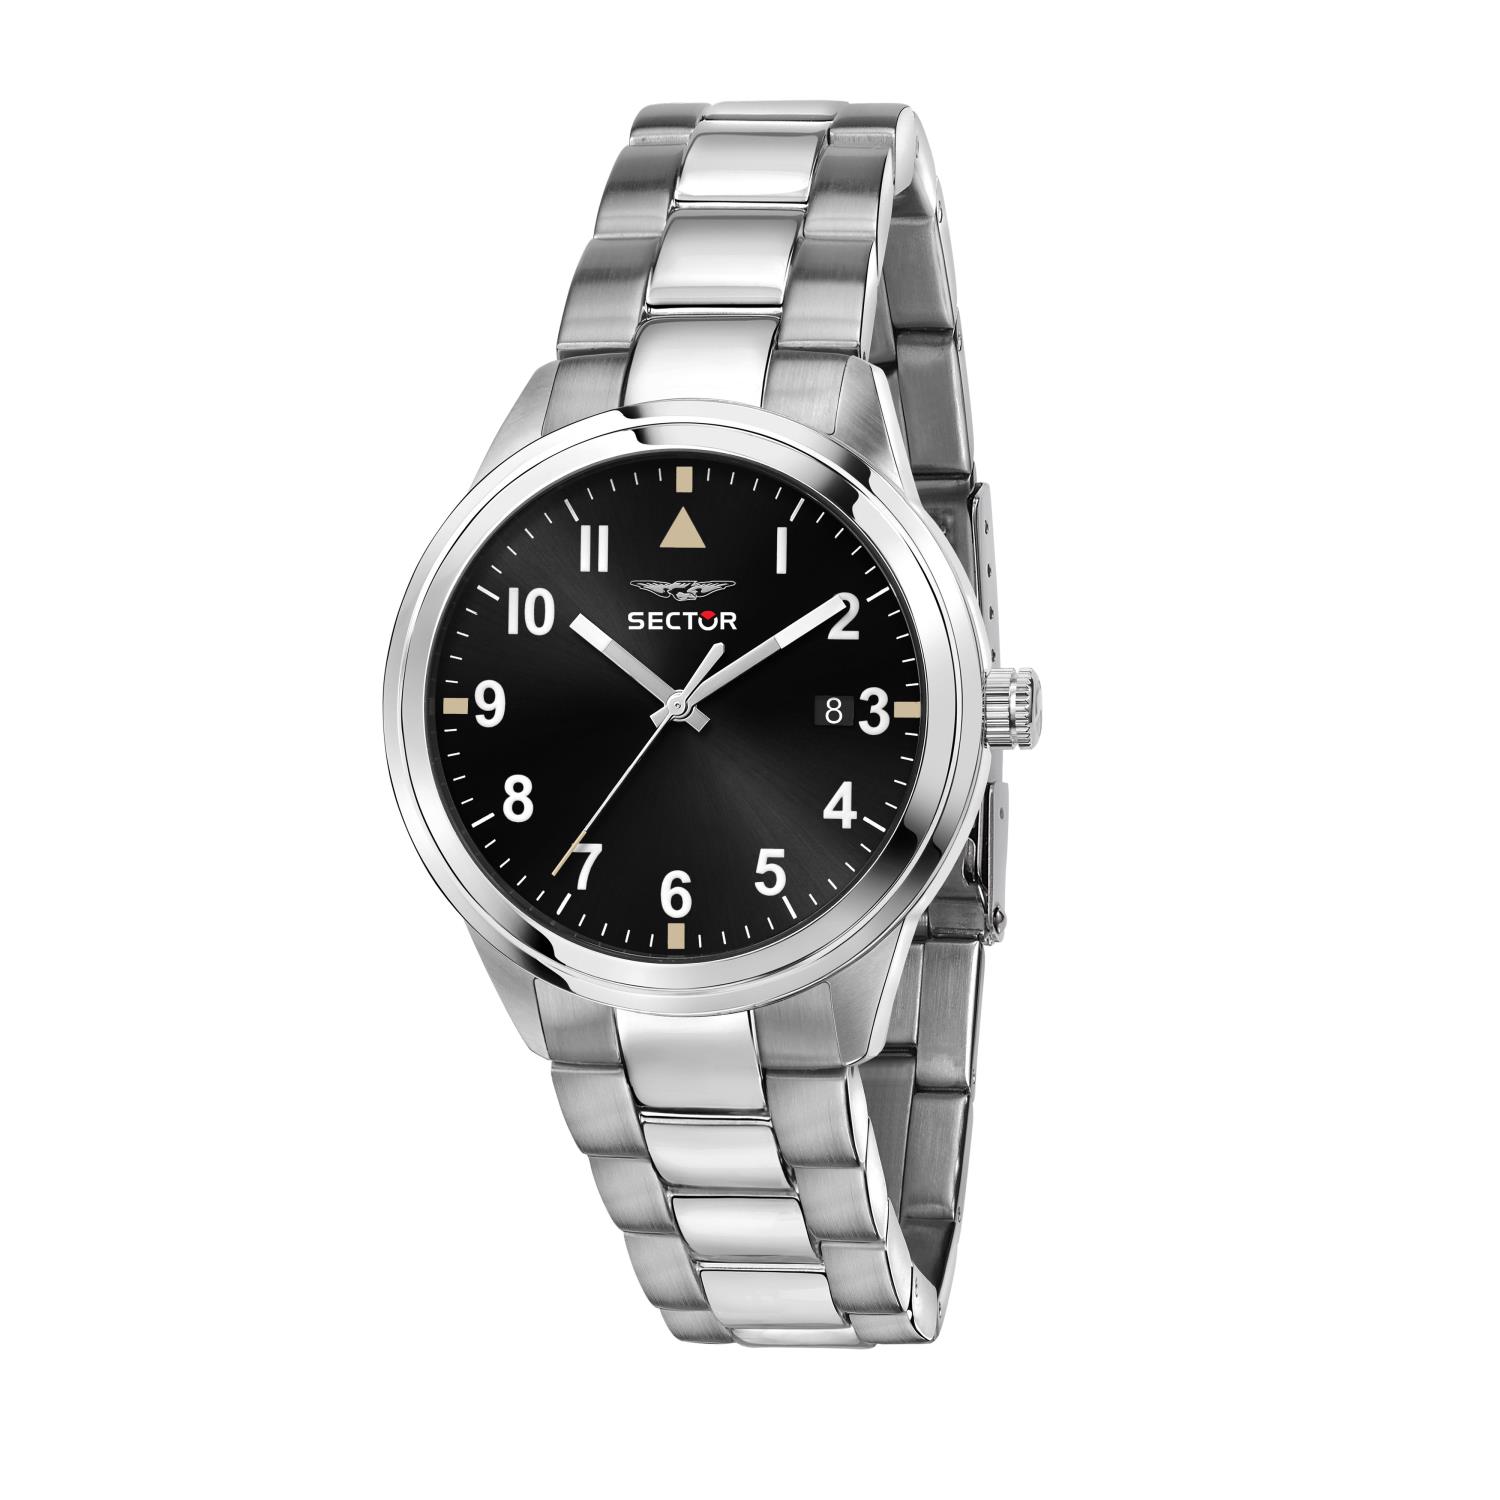 Orologio Sector 670 37 mm Ref. R3253540014 - SECTOR